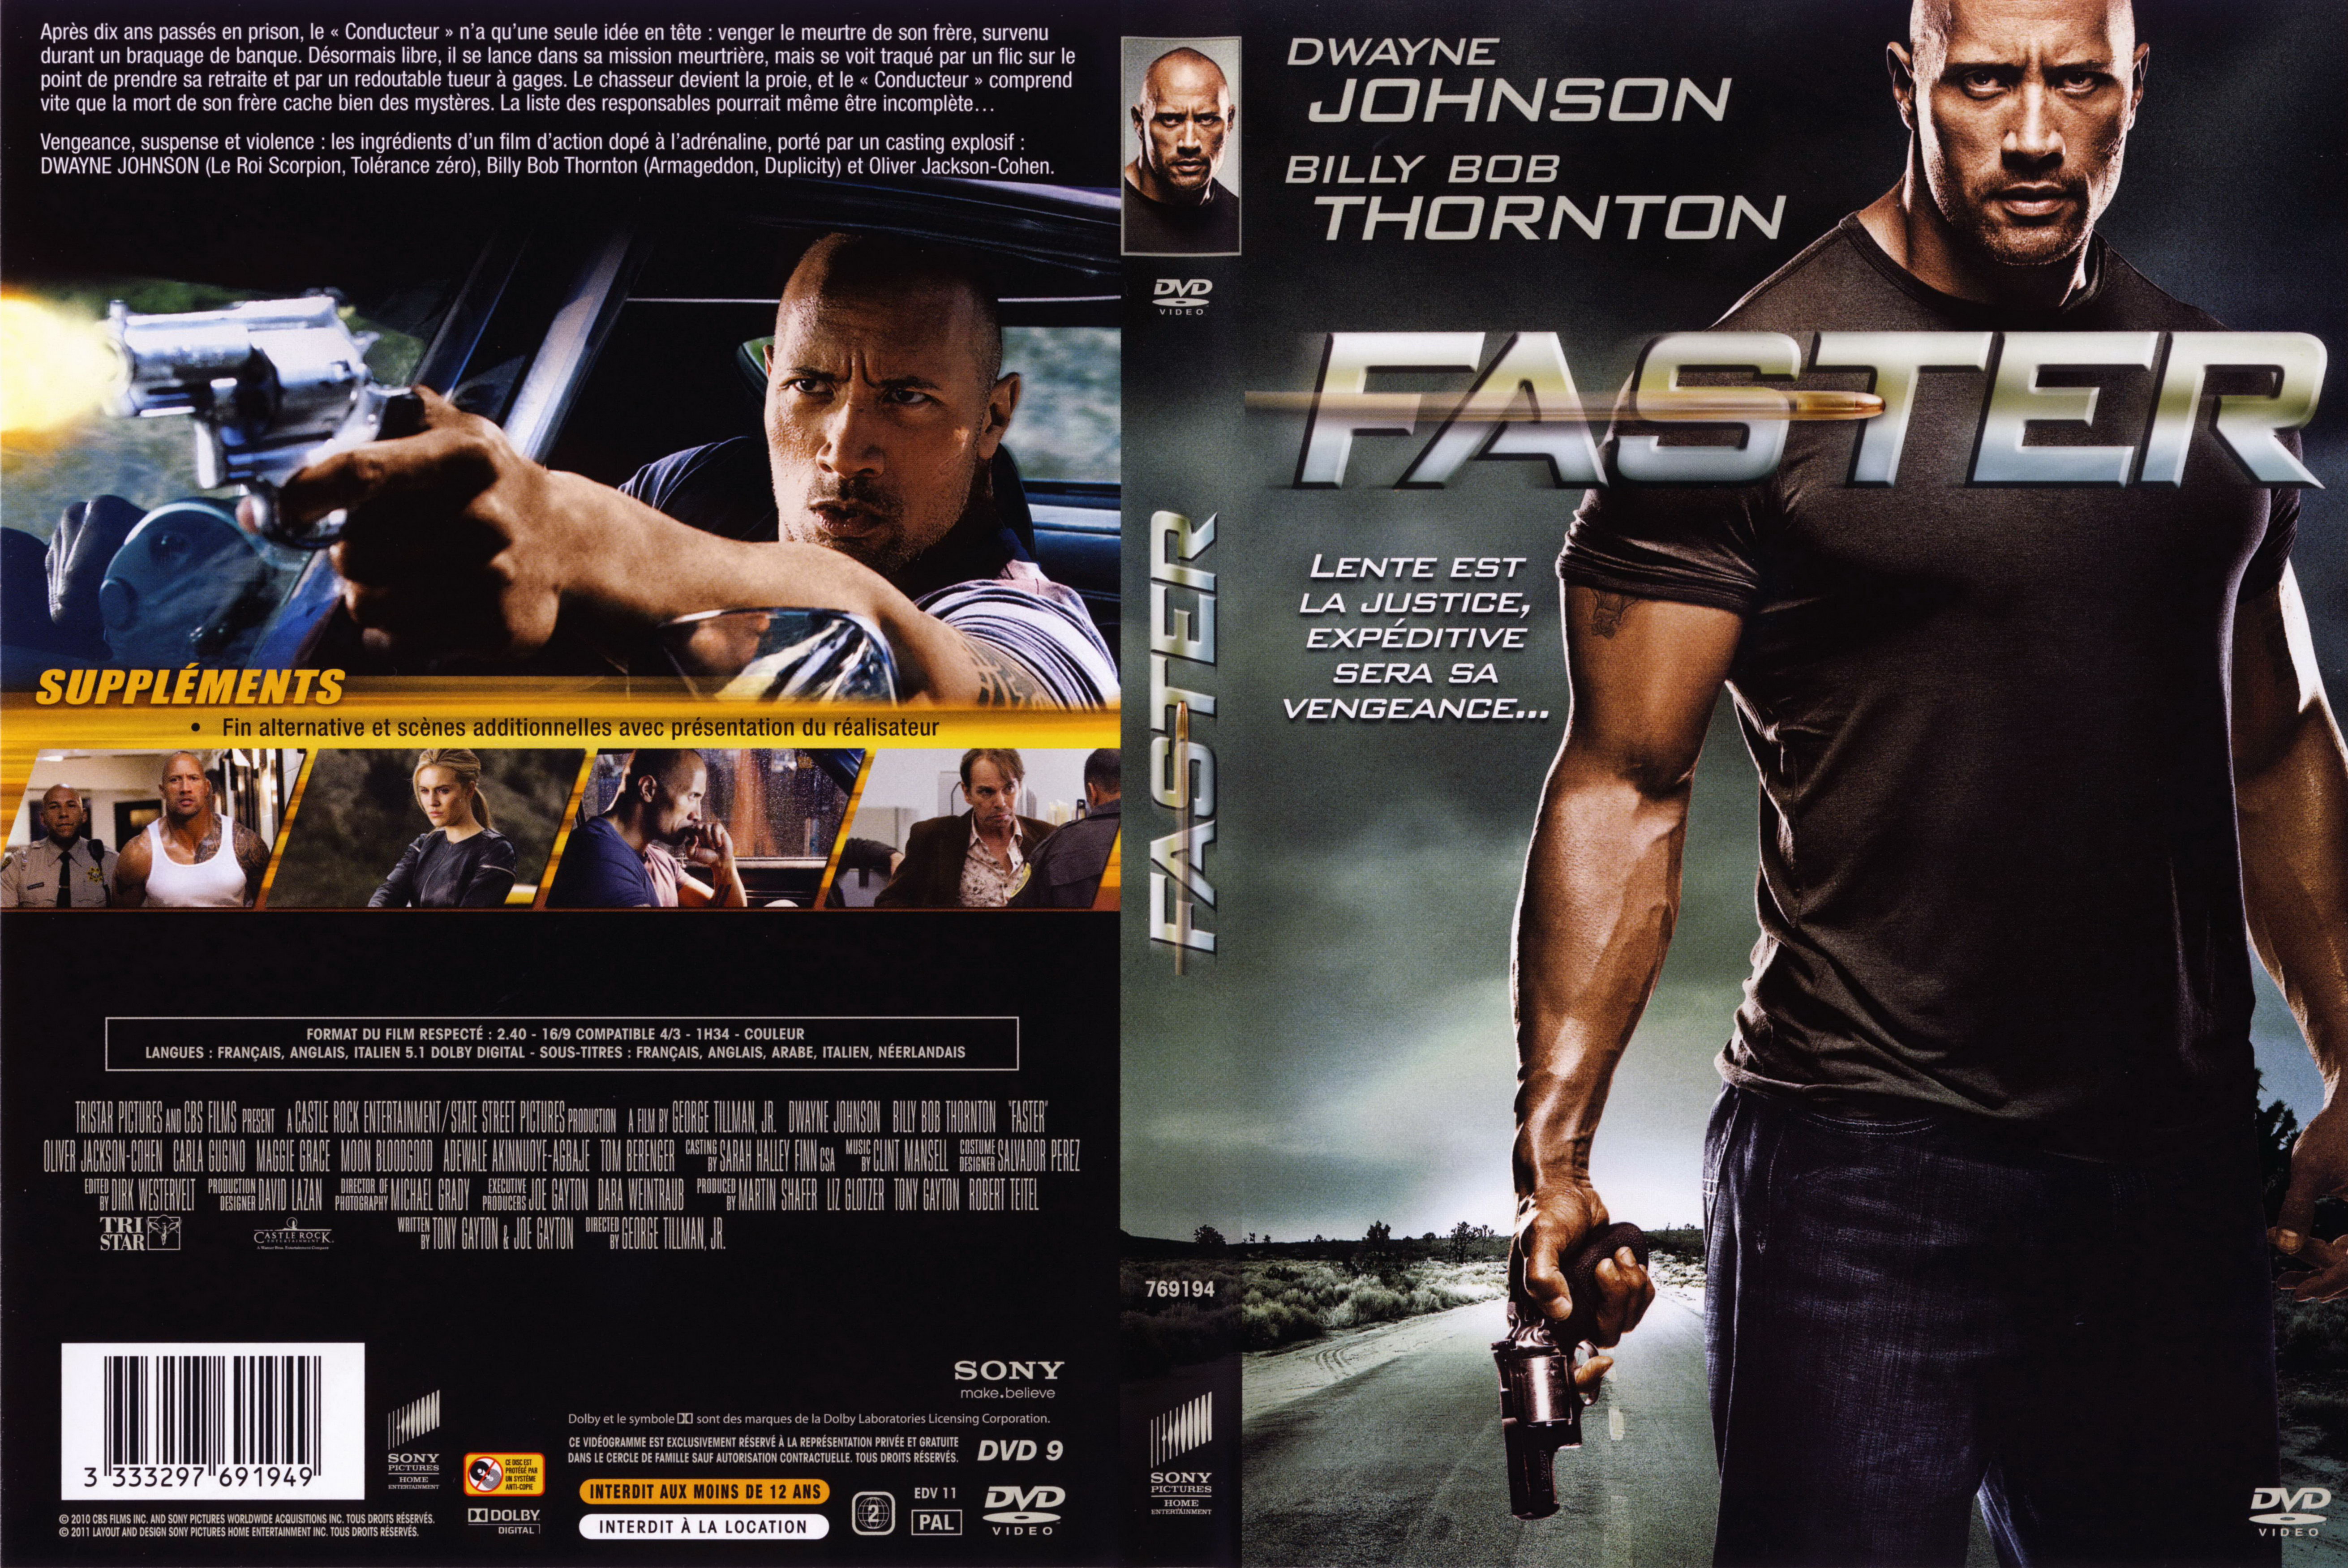 Jaquette DVD Faster